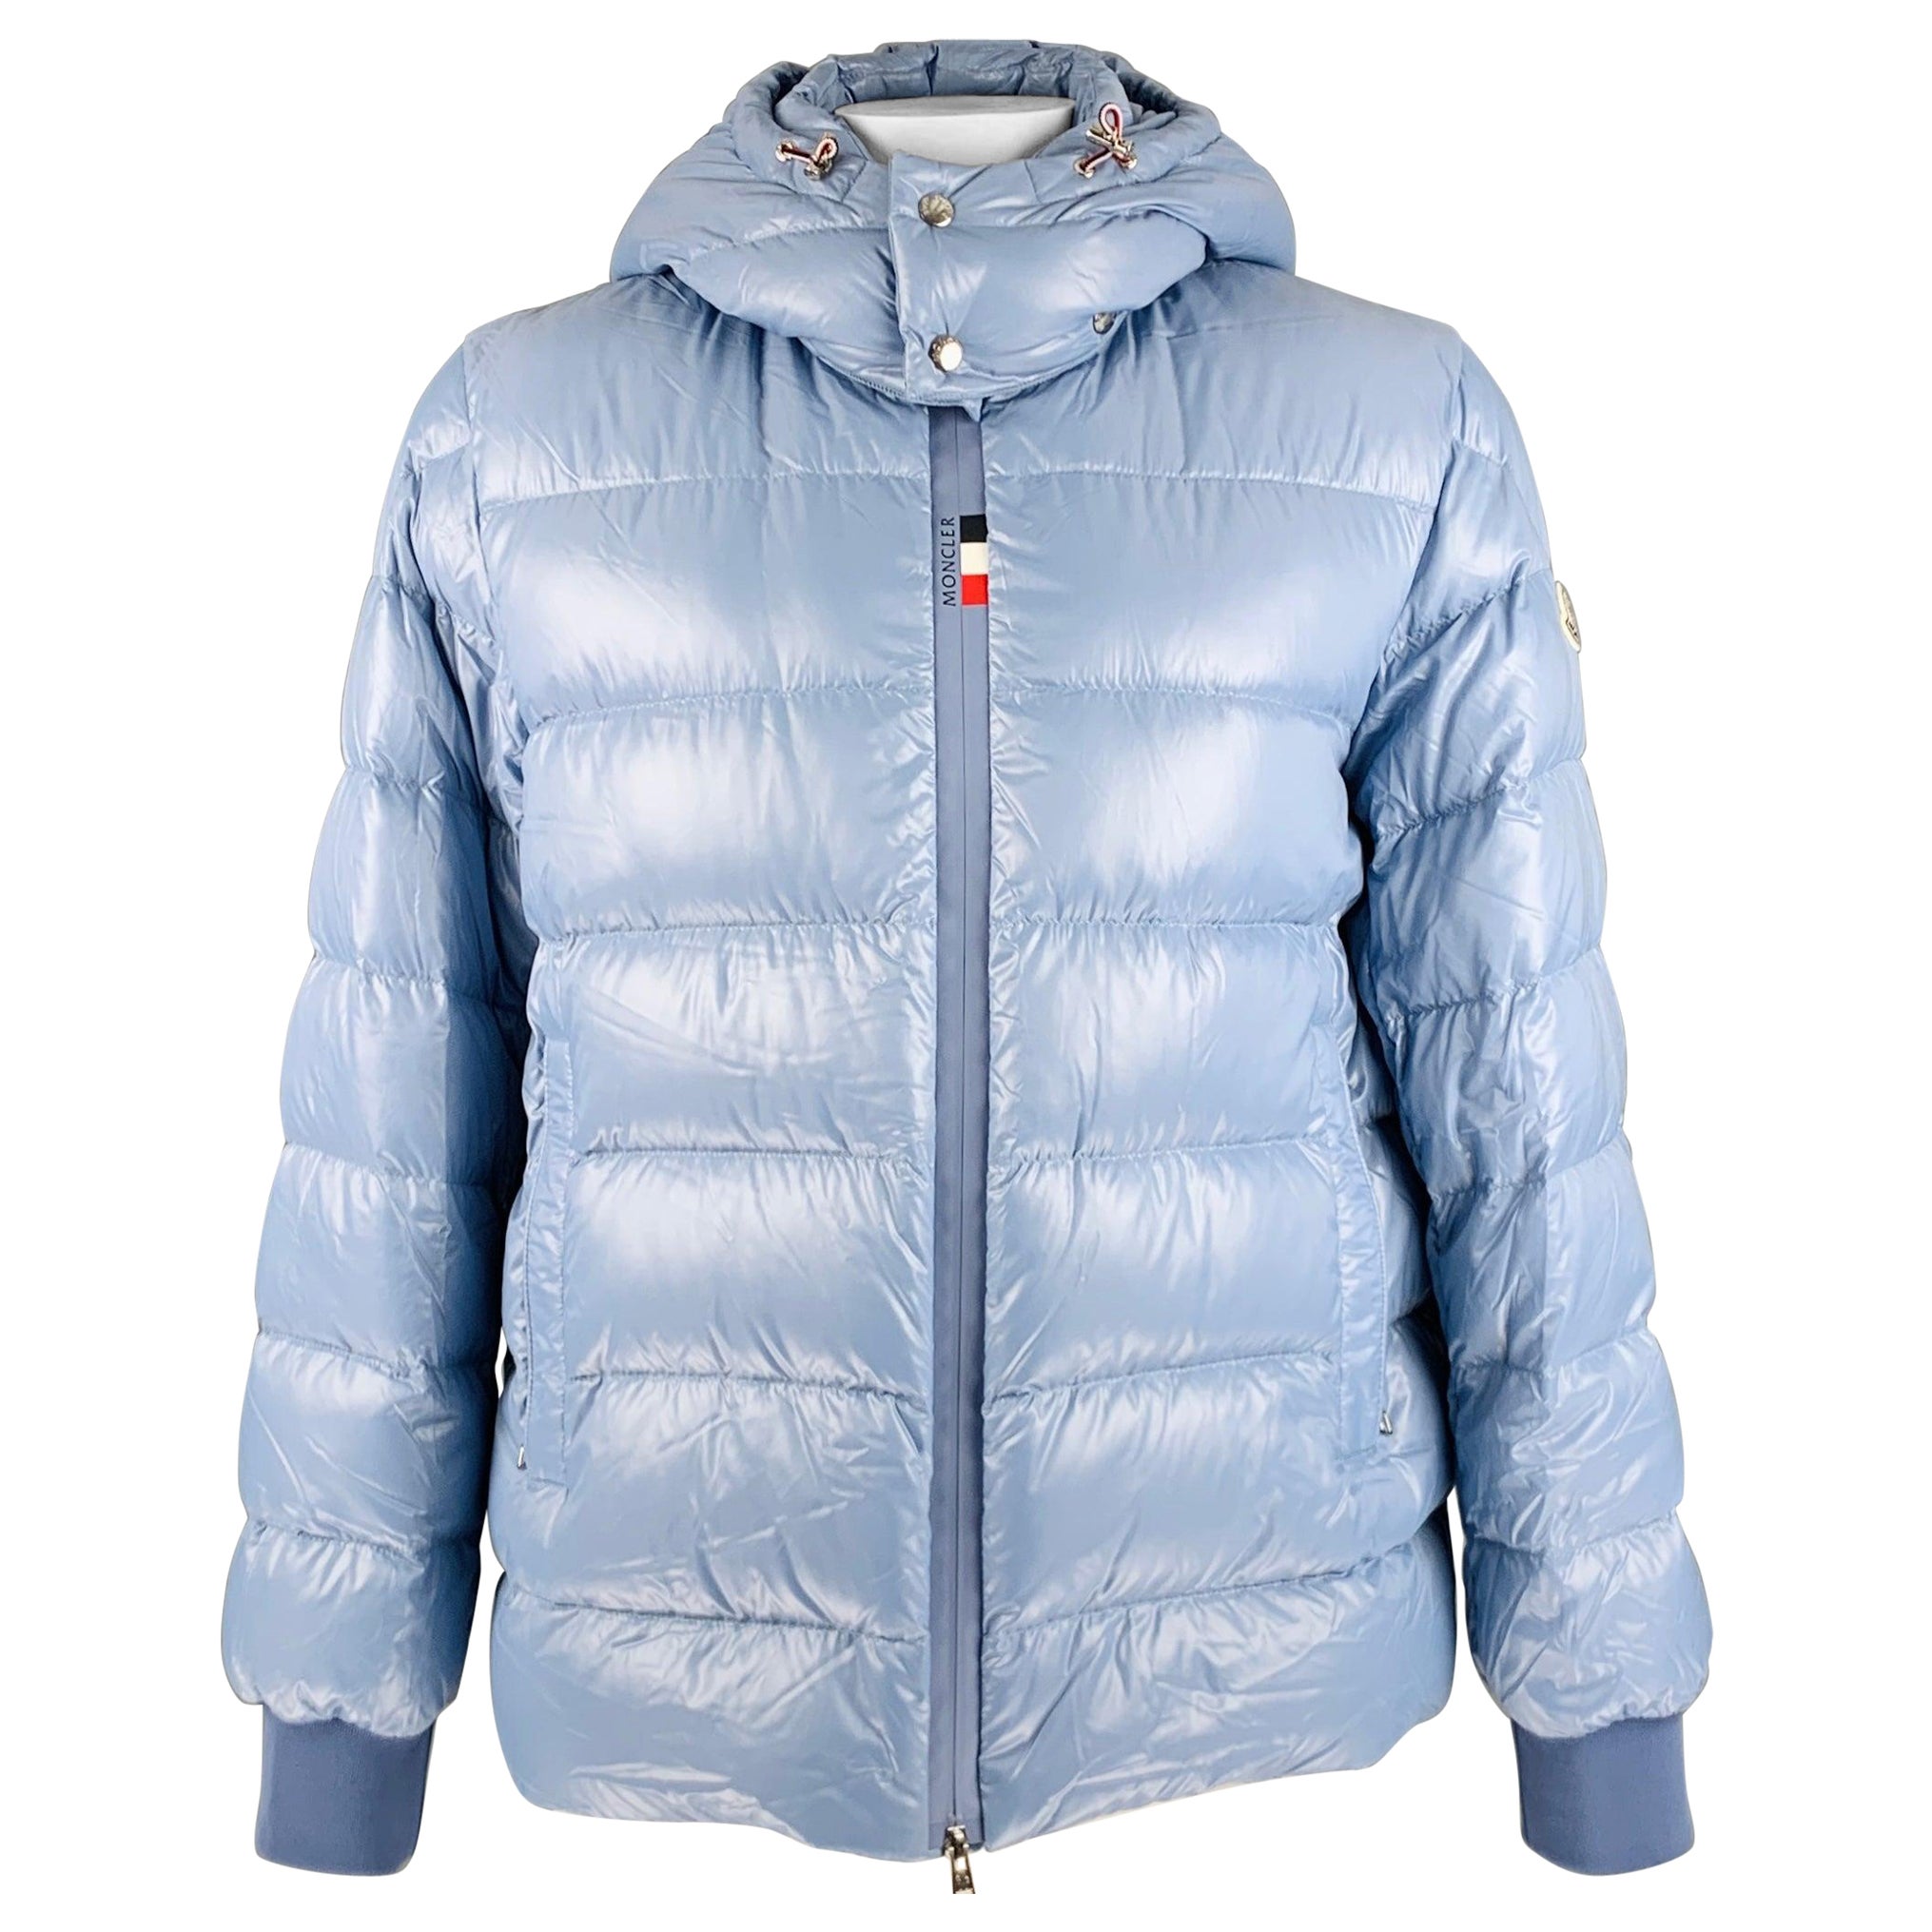 How can you tell if a Moncler jacket is real?